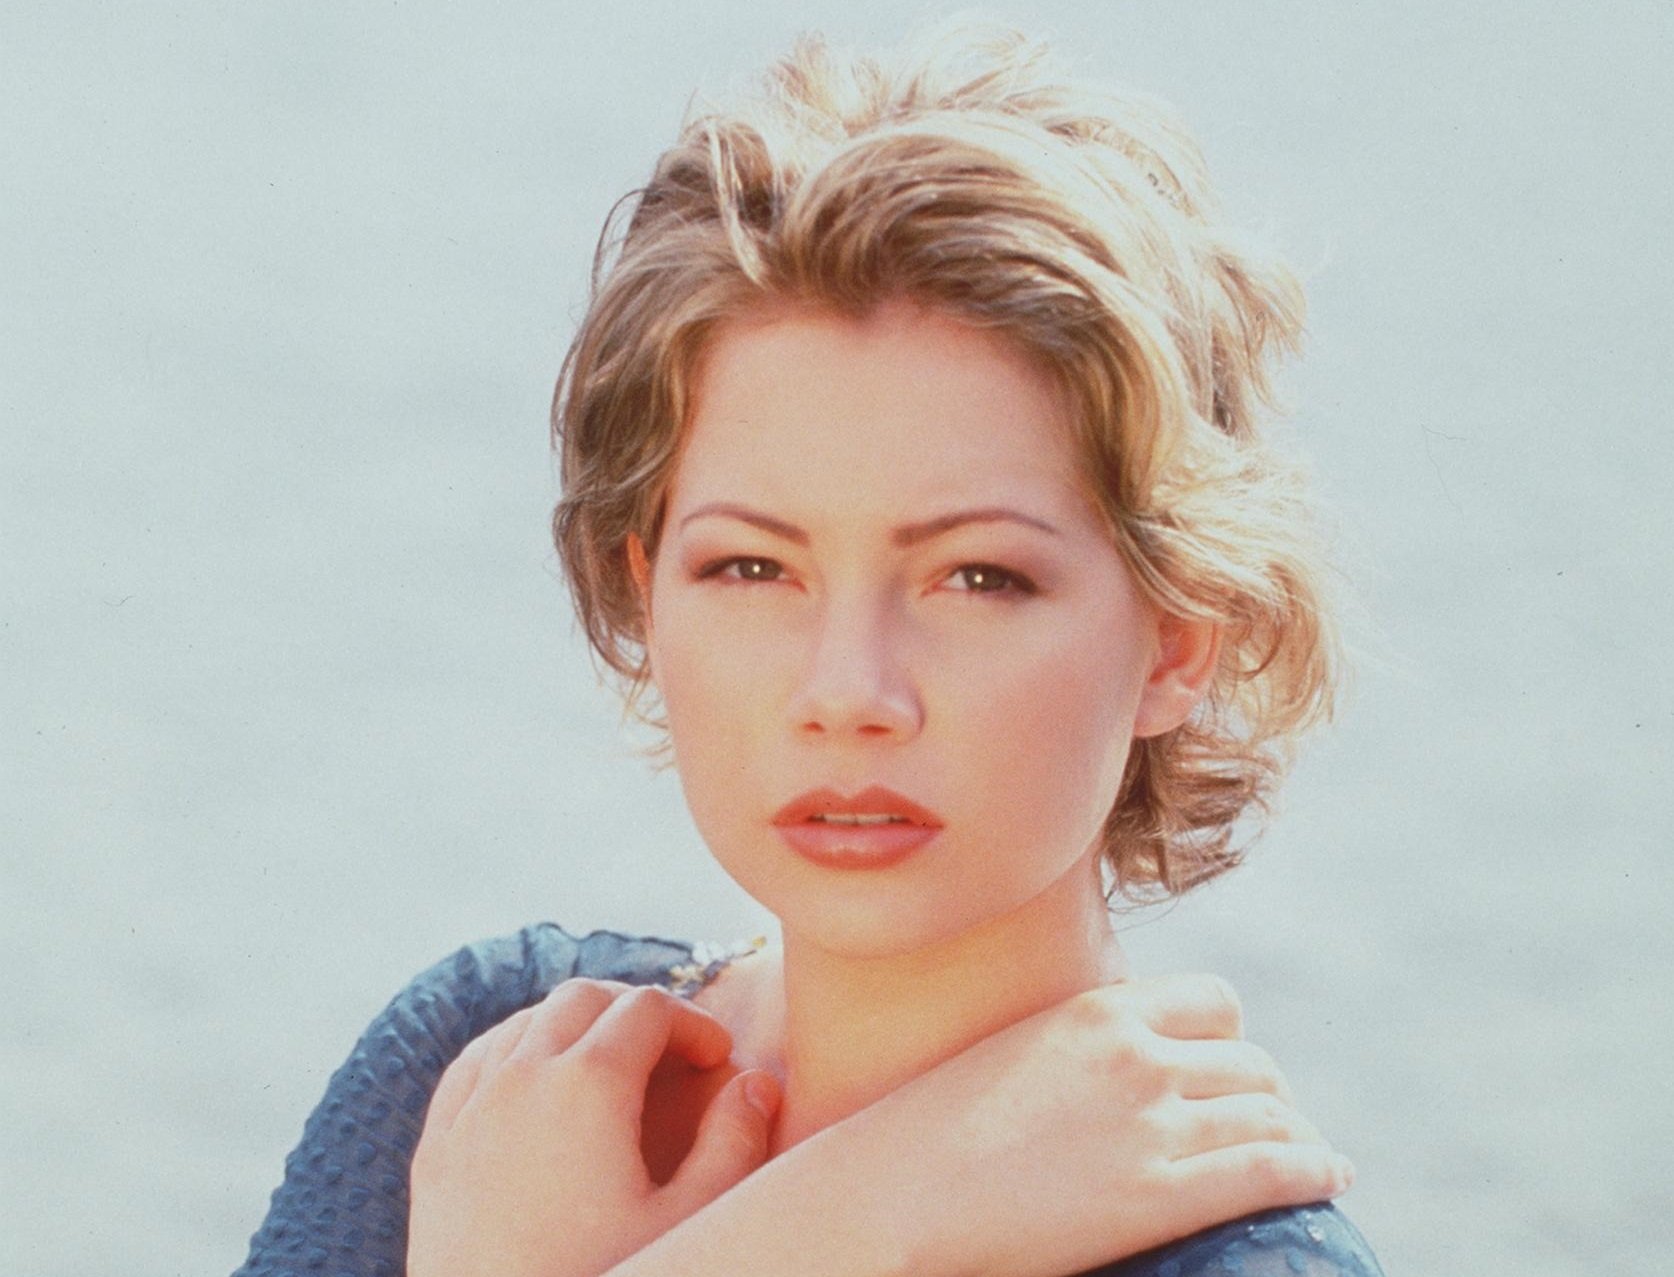 How Michelle Williams Wowed ‘Dawson’s Creek’ Creator at Her Audition